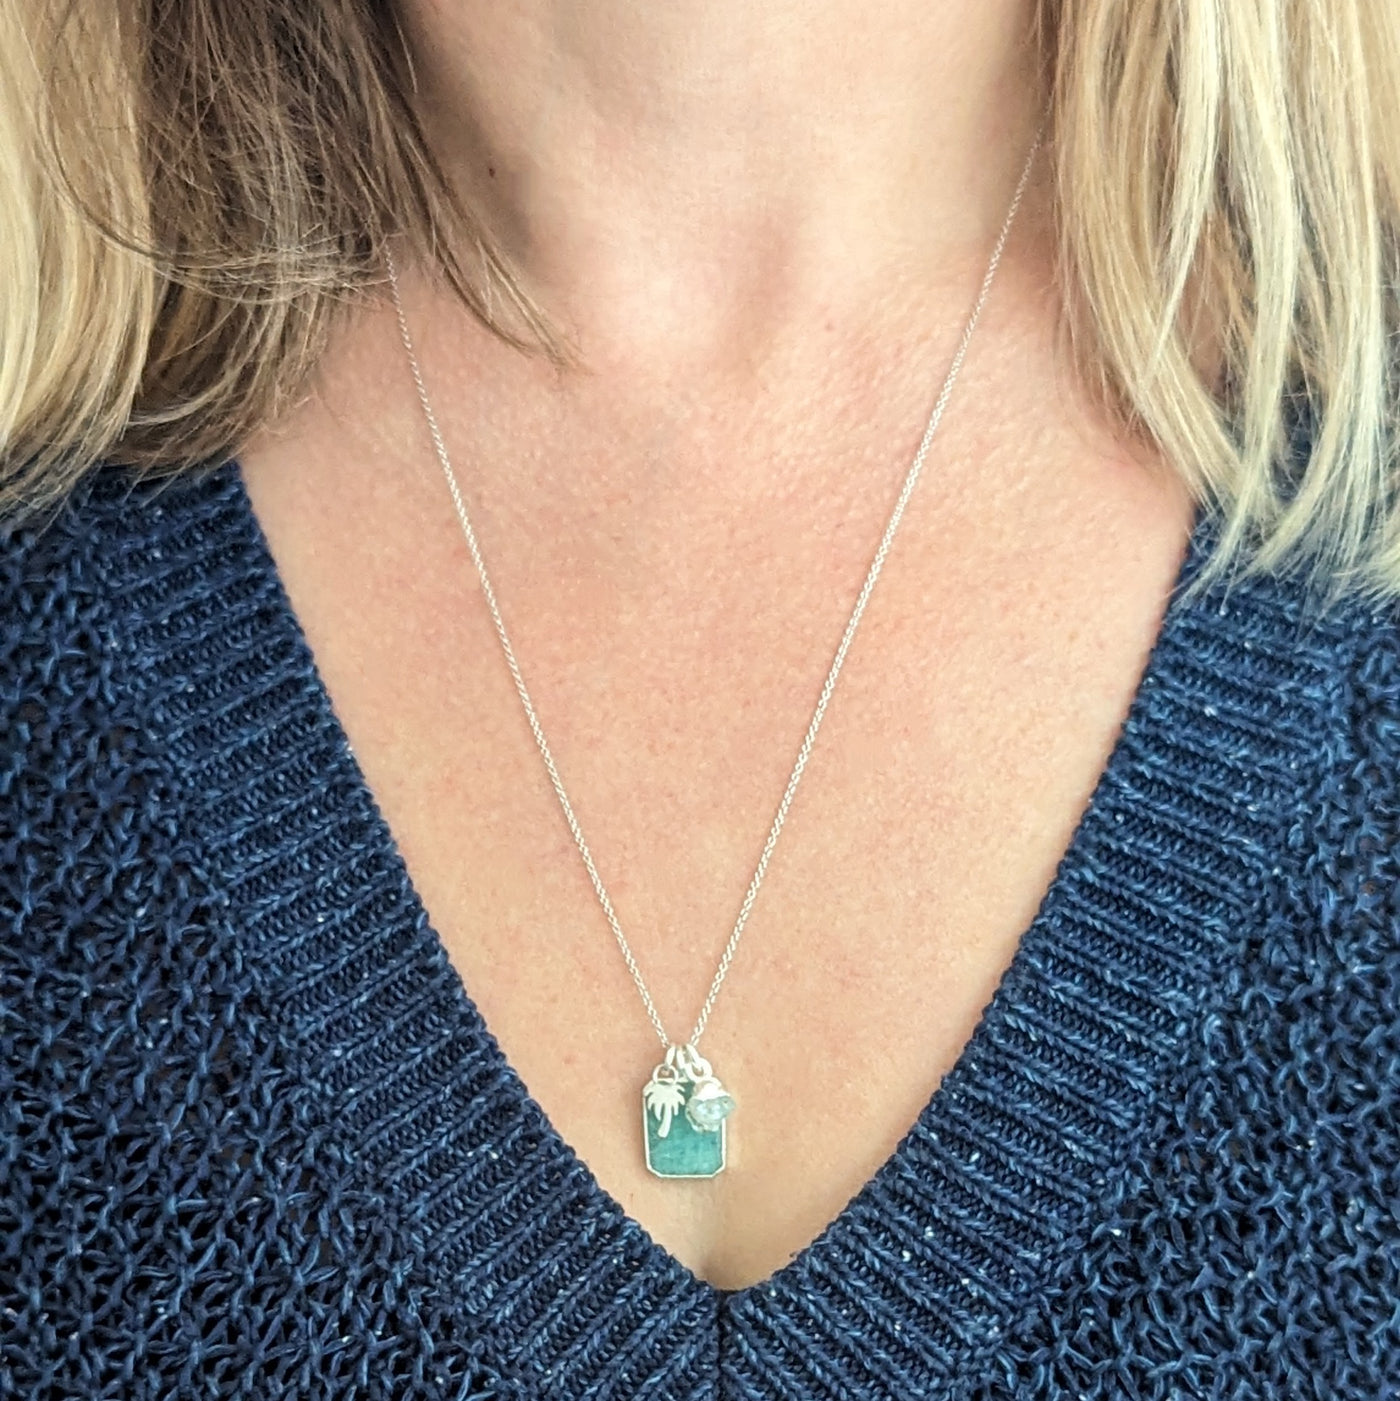 The Trio Amazonite, Aquamarine and Charm Gemstone Necklace - Sterling Silver